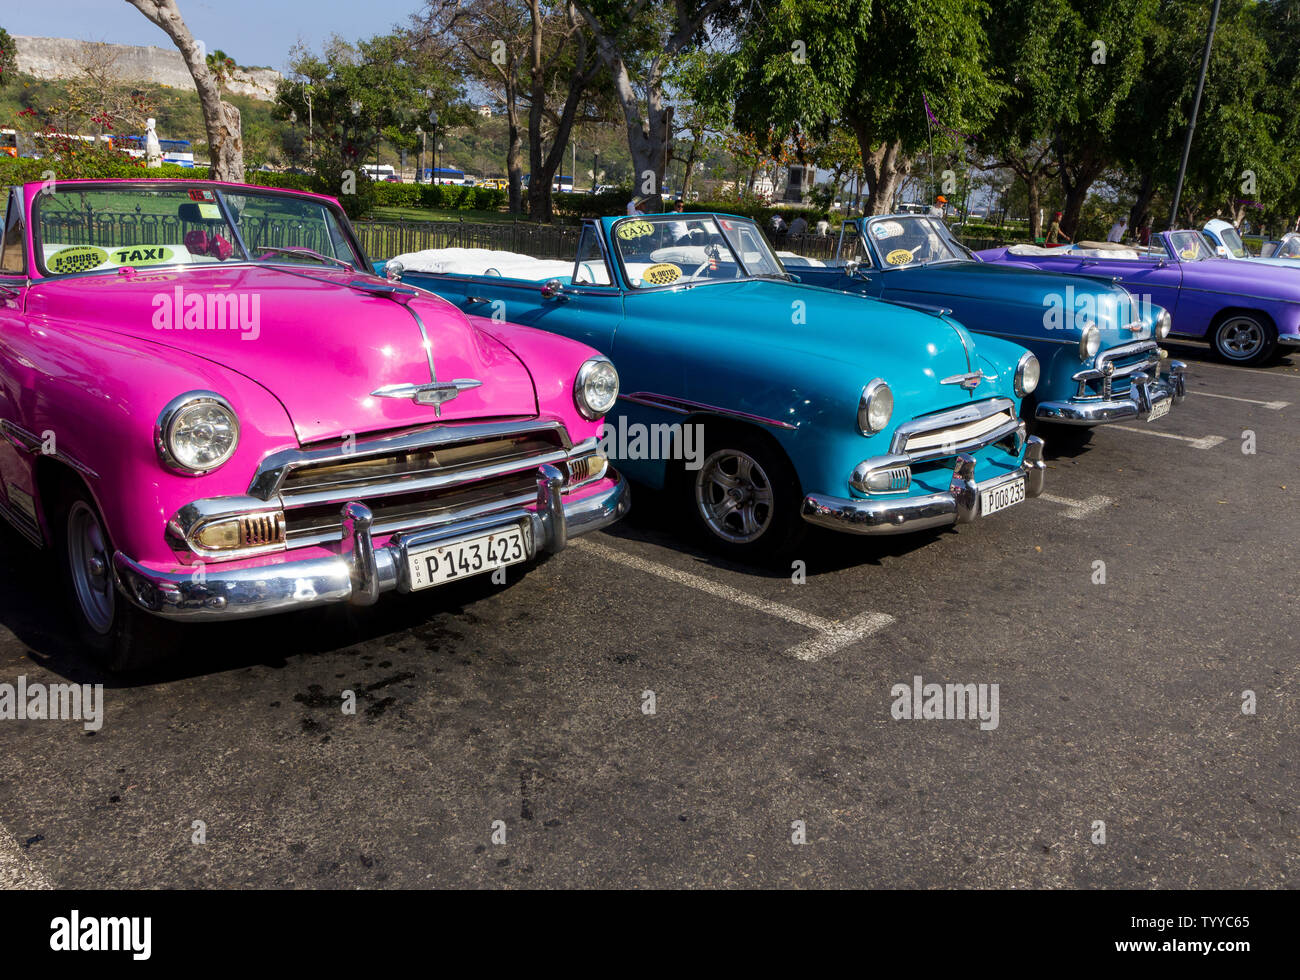 Row of brightly colored classic car taxis in Havana Cuba Stock Photo